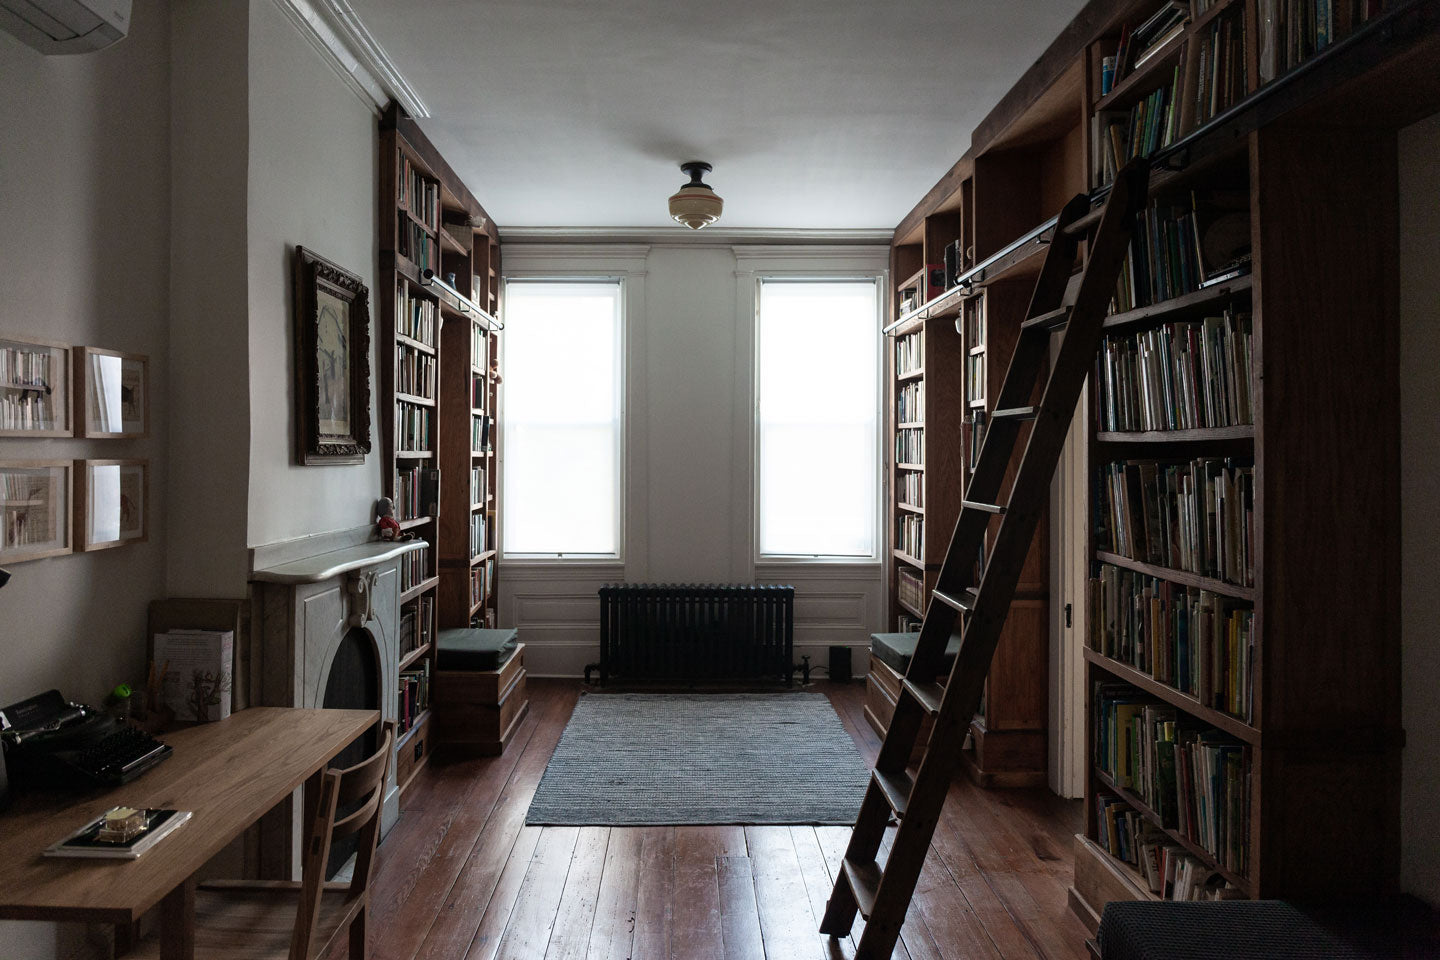 Peg and Awl House Library | Photograph by Rikumo